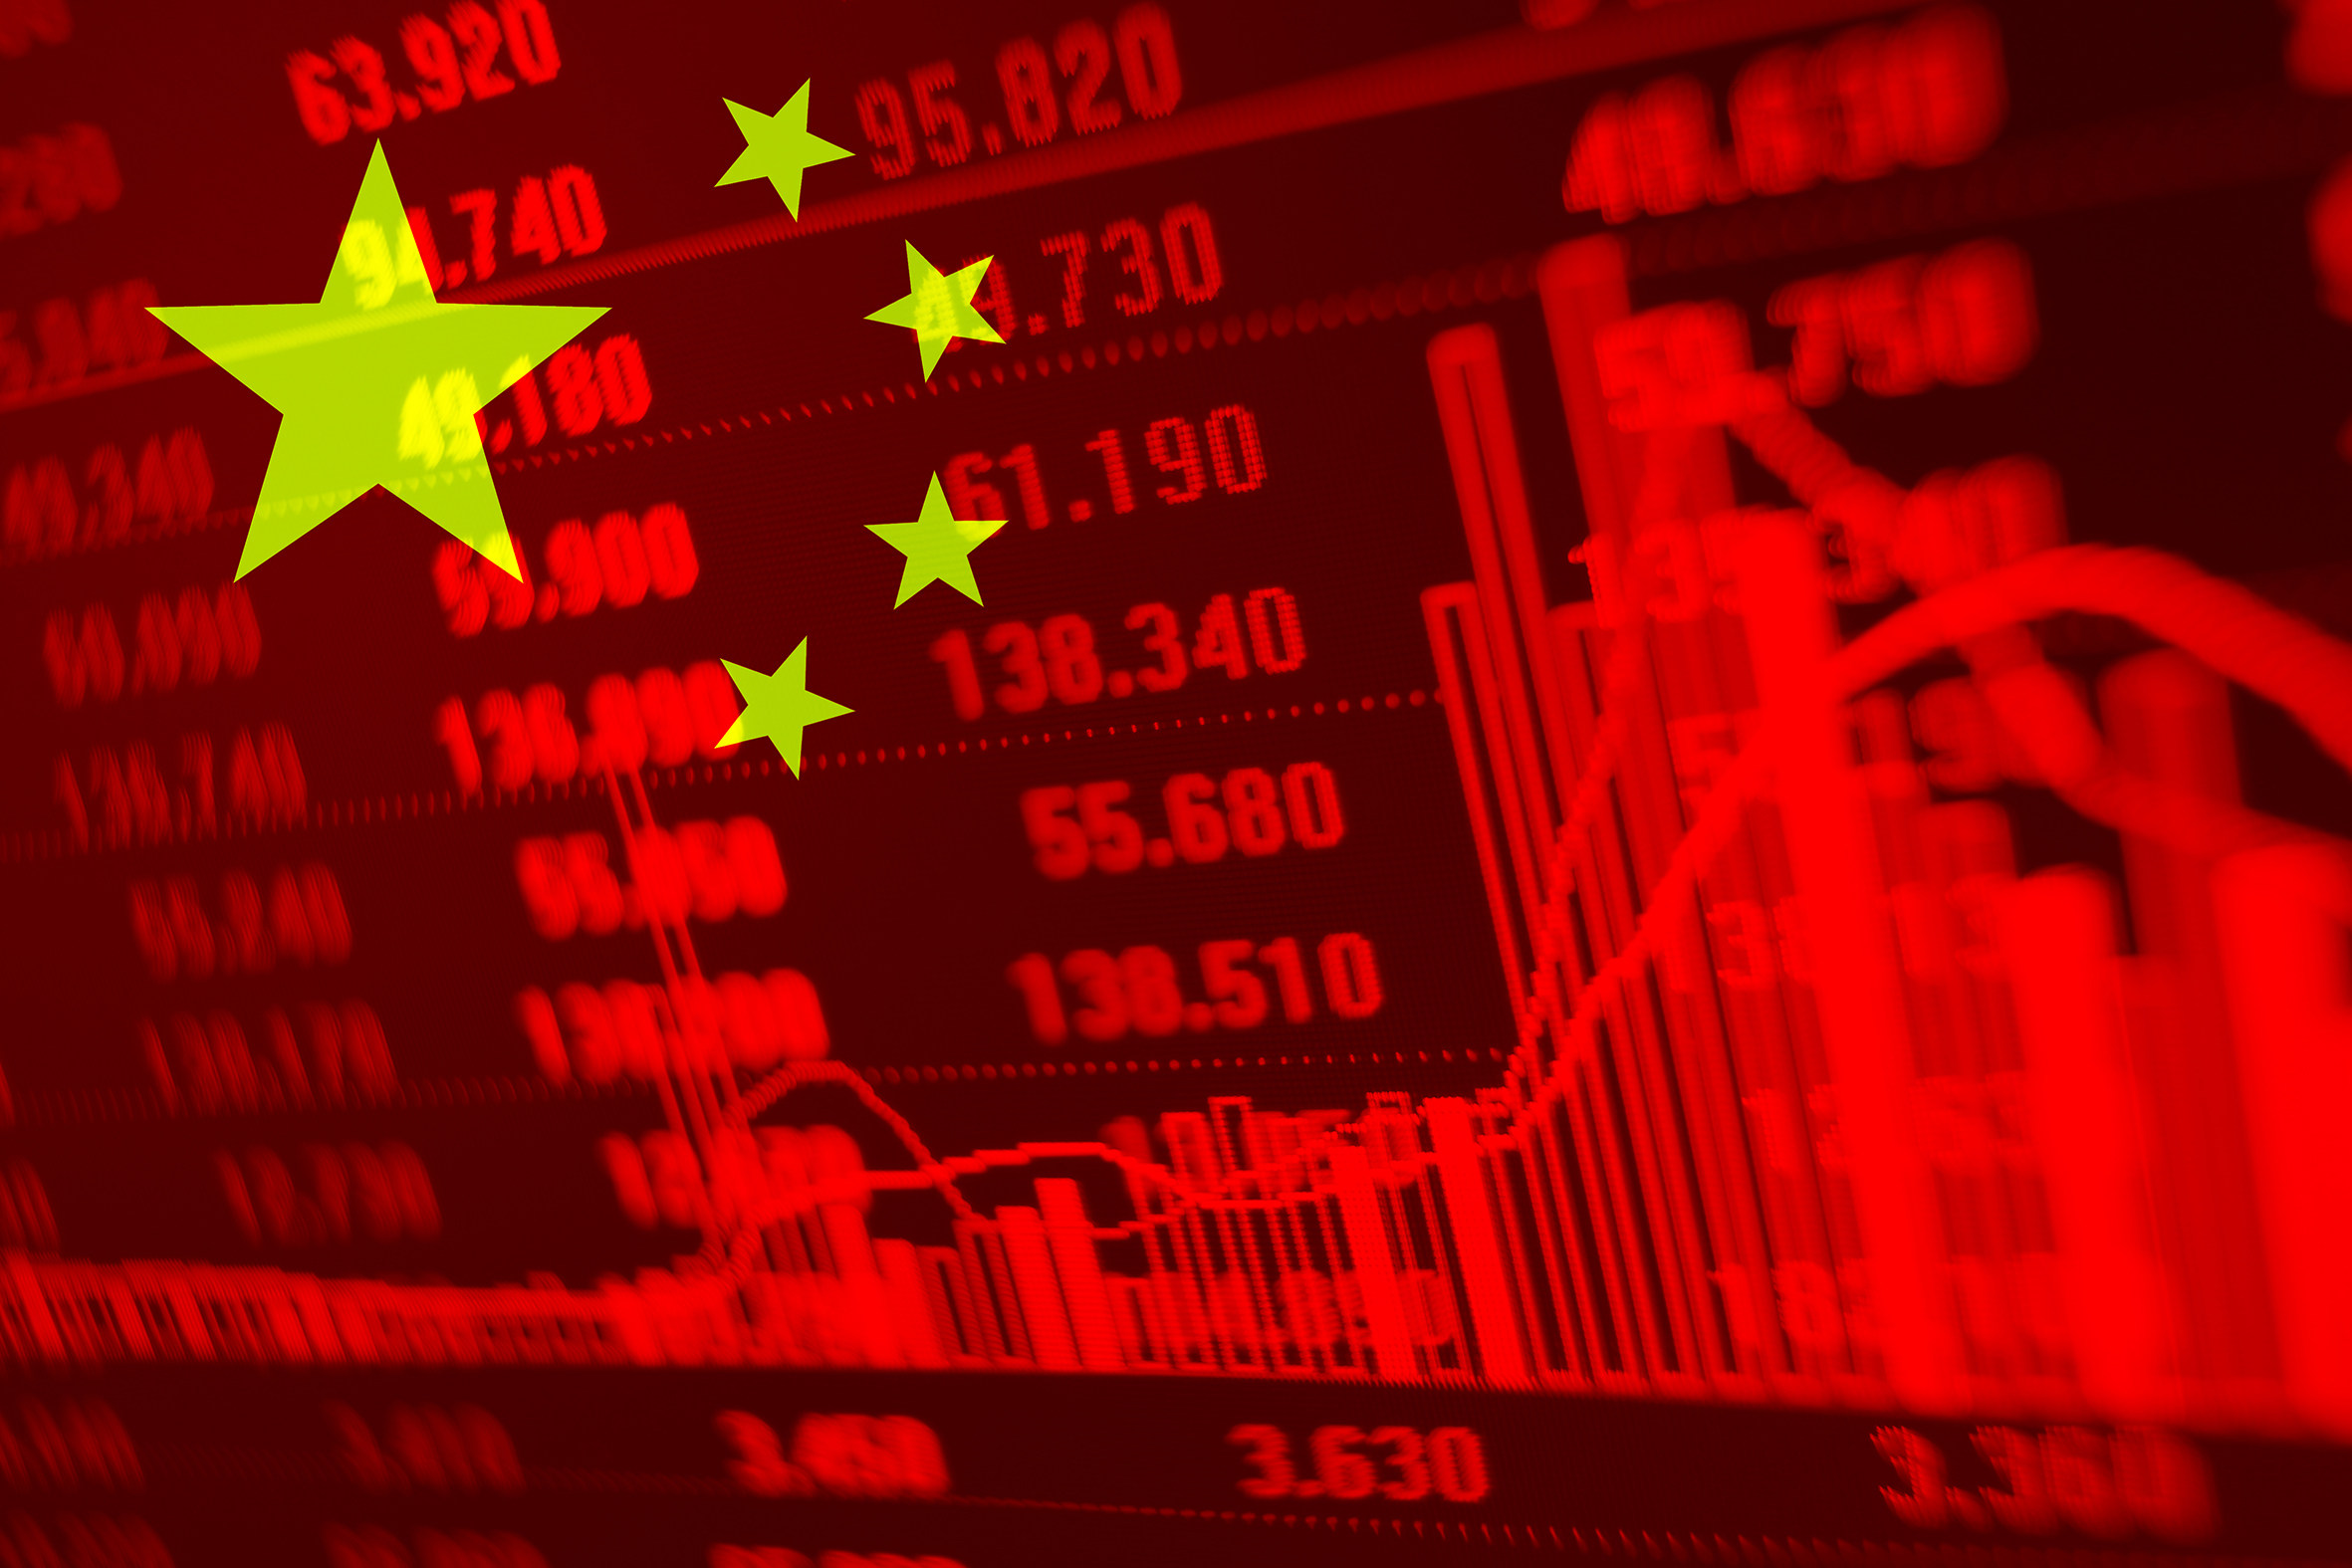 The reliability of China’s economic data has long been questioned, primarily by overseas observers, who have called into question figures, including gross domestic product (GDP) growth, household income and unemployment. Photo: Shutterstock